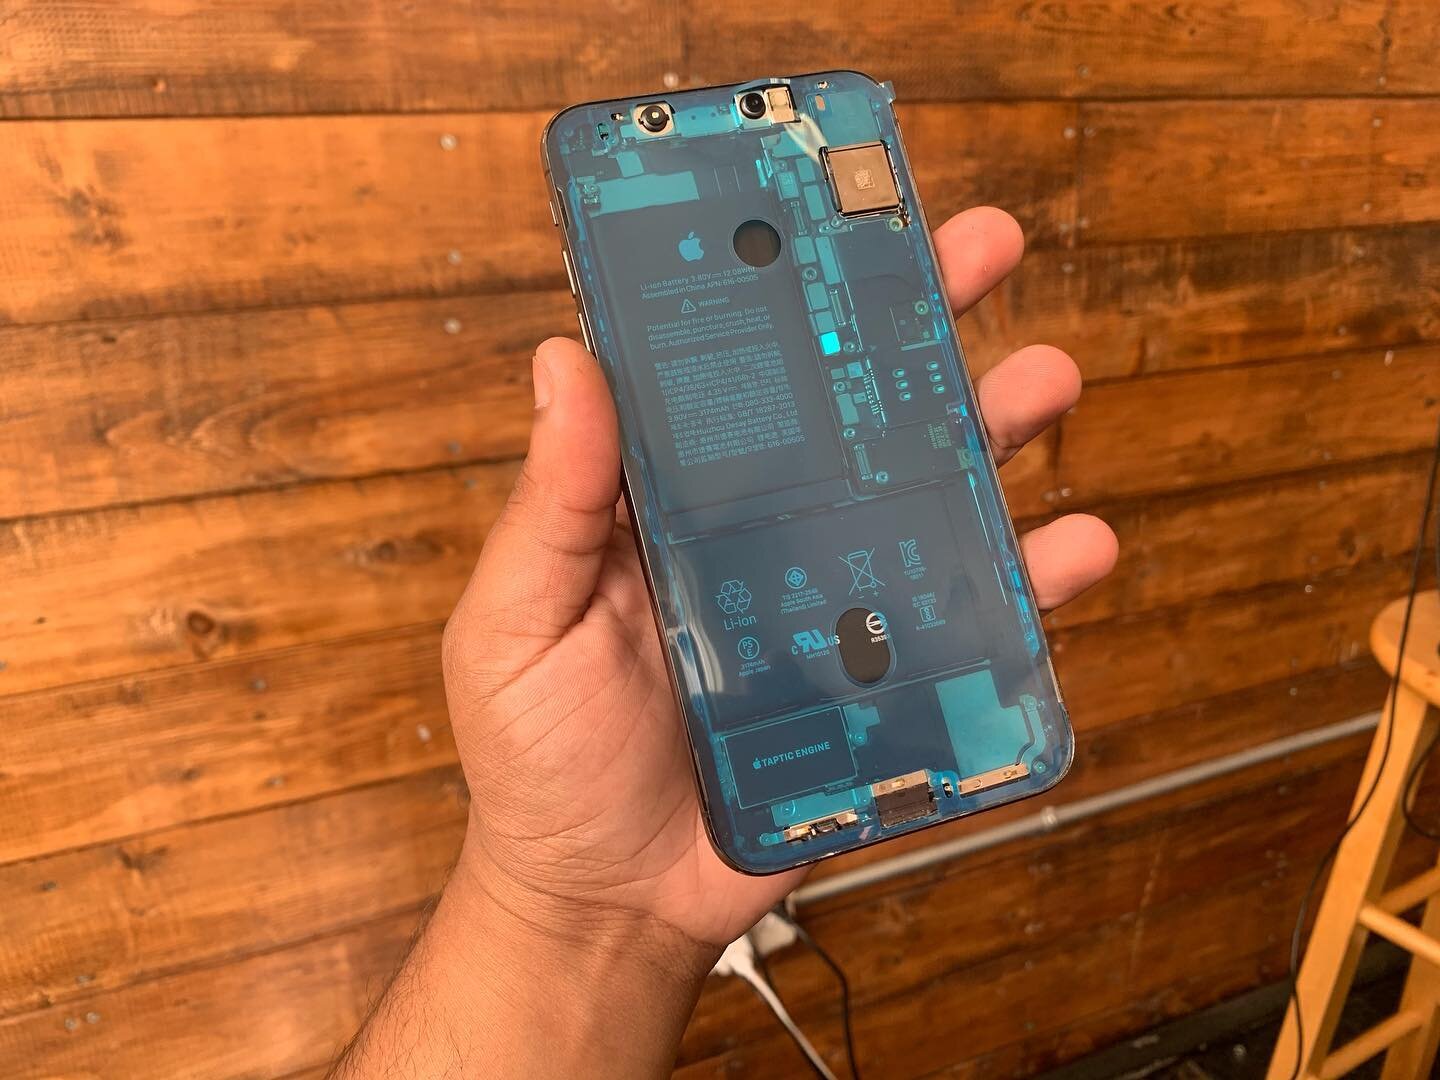 iPhone XS Max Screen Repair for Ian 📲Call, Text, or slide in our DMs to schedule an appointment. You have our permission. ⭐️⭐️⭐️⭐️⭐️⠀⠀⠀⠀⠀⠀⠀⠀⠀⠀⠀⠀⠀⠀⠀⠀⠀⠀ ⠀⠀⠀⠀⠀⠀⠀⠀⠀⠀⠀⠀⠀⠀⠀⠀⠀⠀
💻 EzekielTech
📲: (845) 857-5760 ⠀⠀⠀⠀⠀⠀⠀⠀⠀⠀⠀⠀⠀⠀⠀⠀⠀⠀⠀⠀ 🌎:www.Ezekiel.tech
🔛Fa